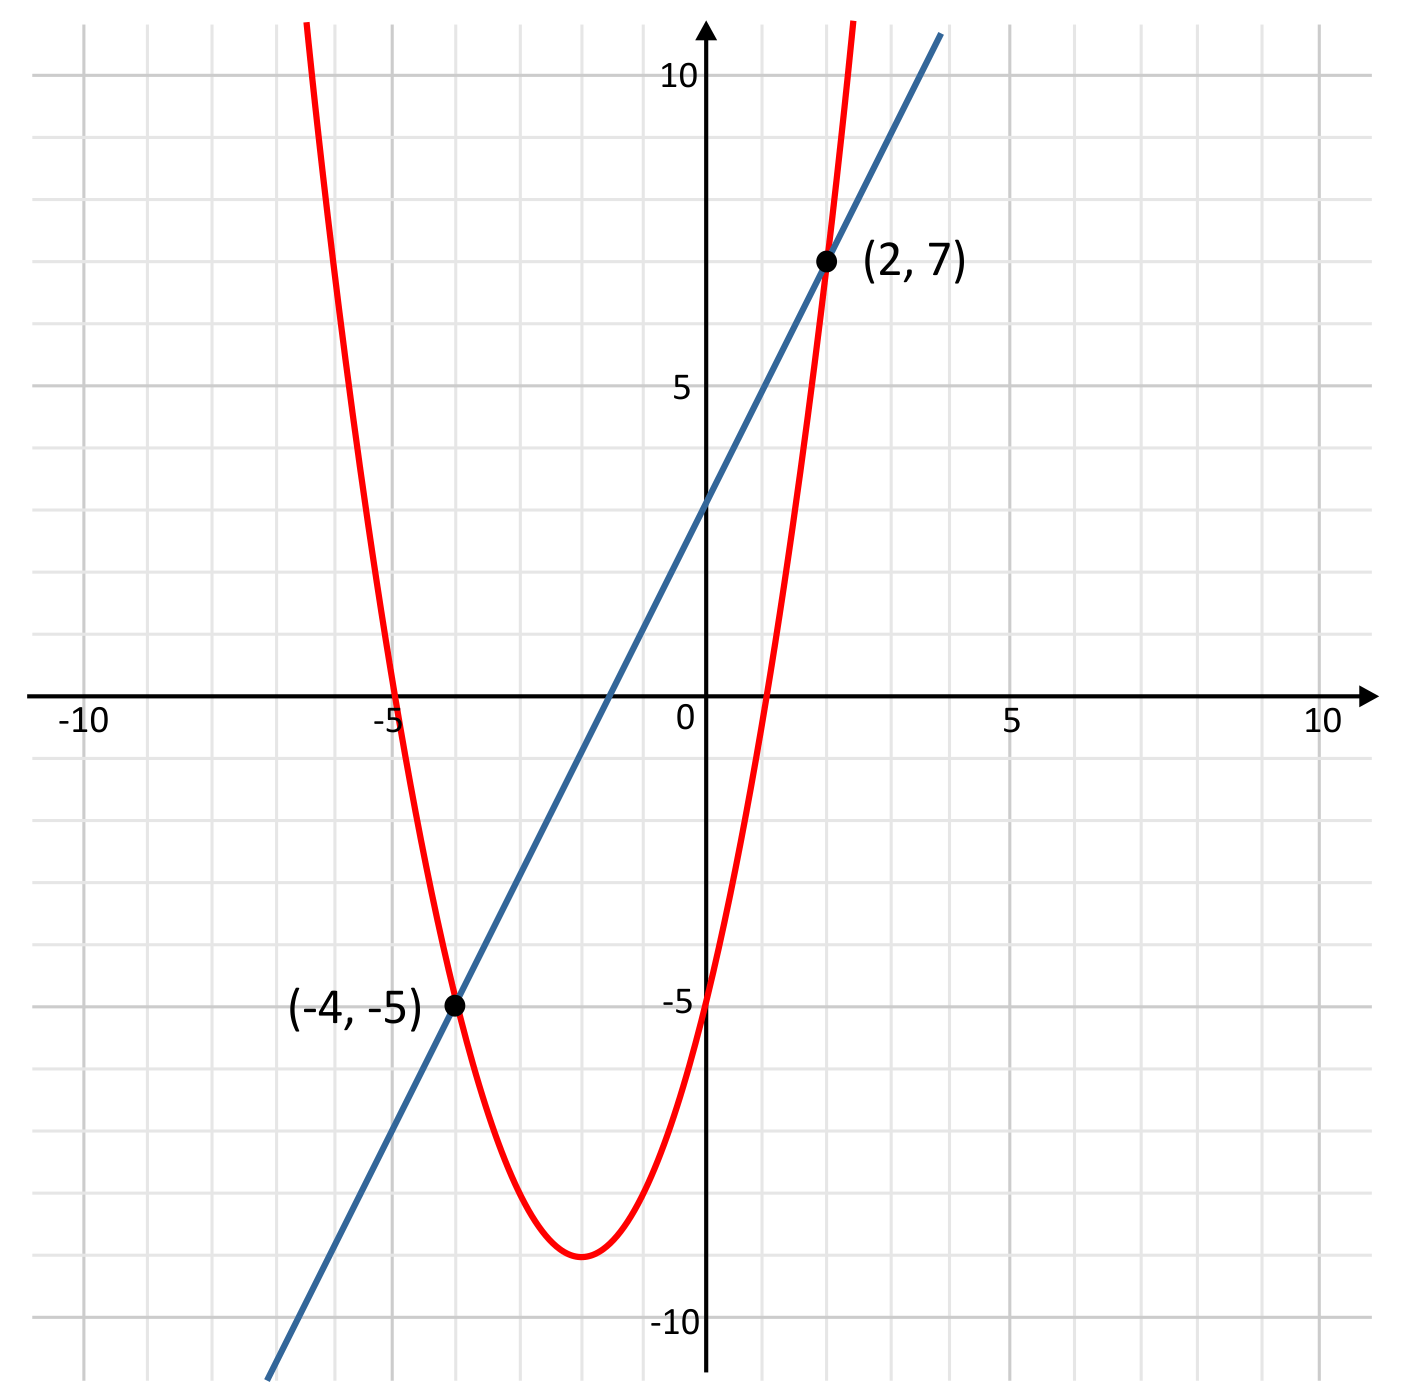 parabola and linear line intersecting at (2,7) and (-4,-5) on a graph